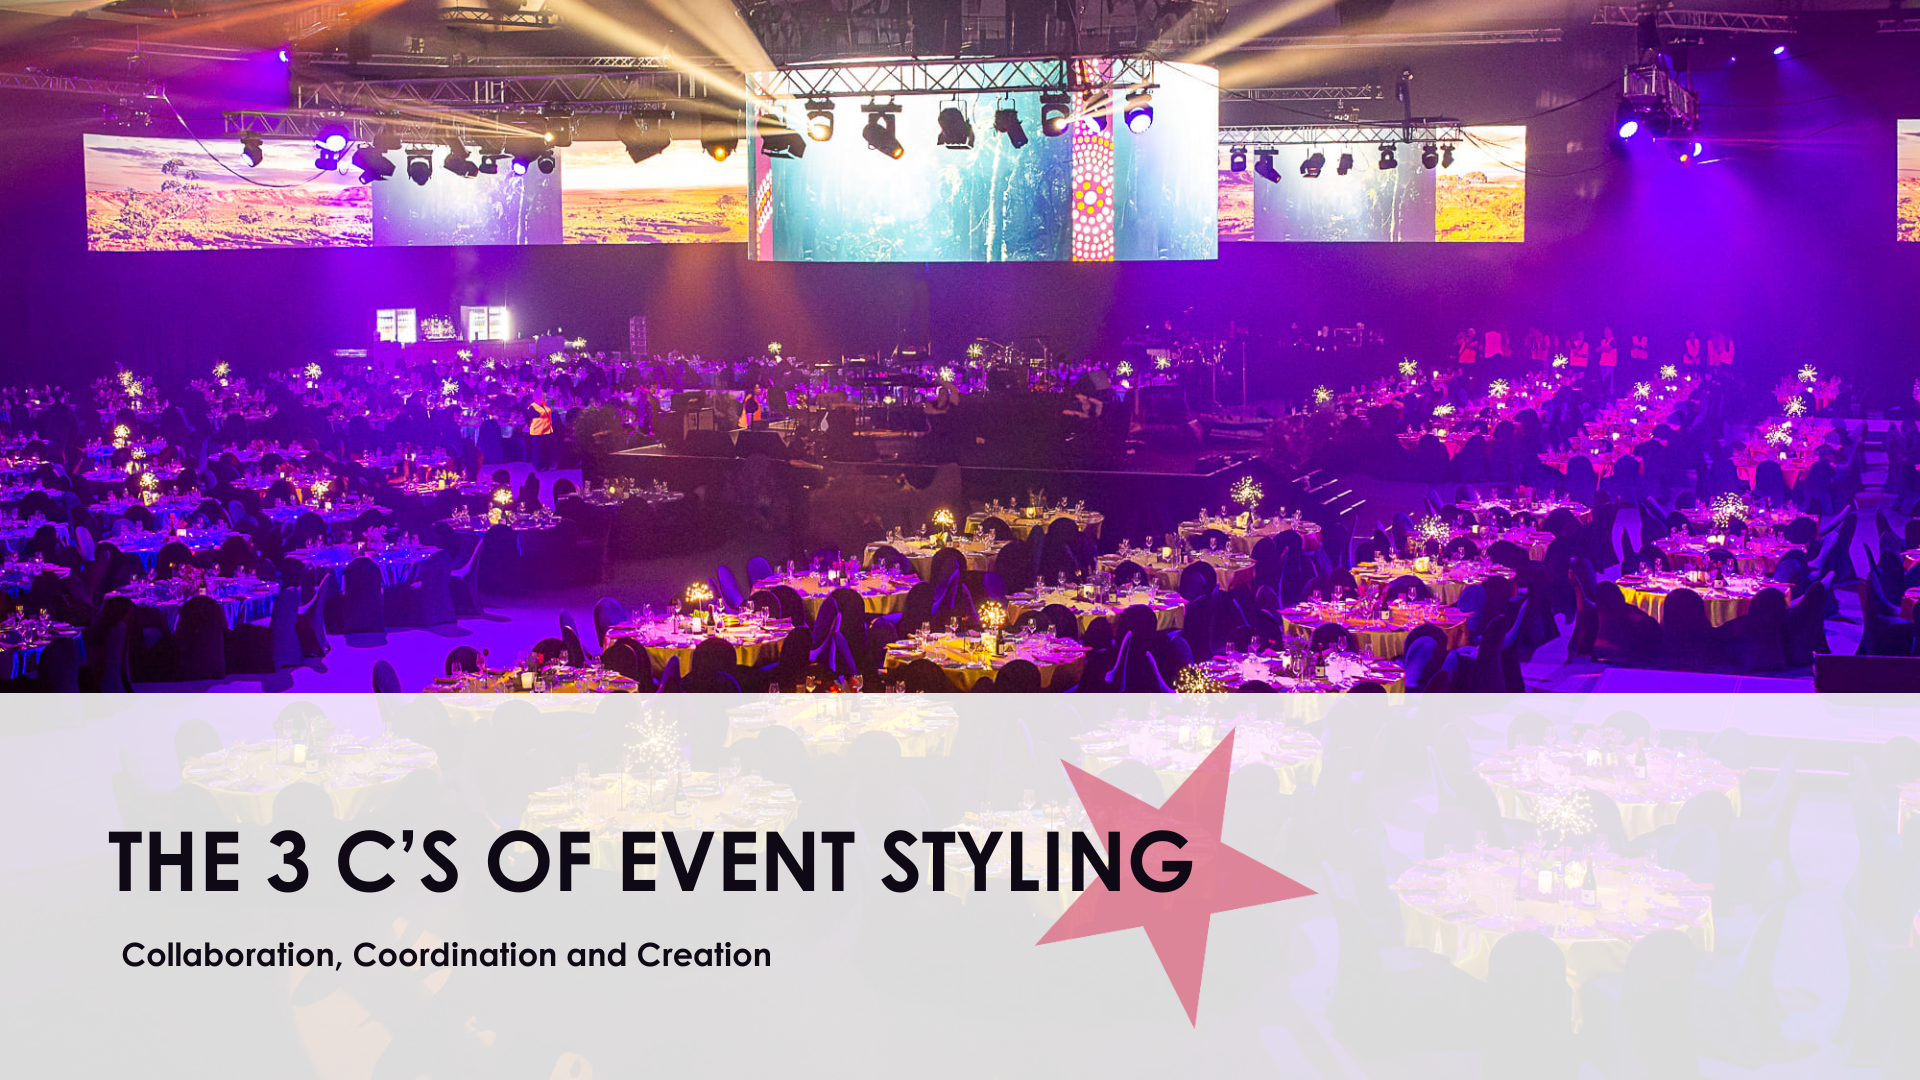 The 3 C's of Event Styling